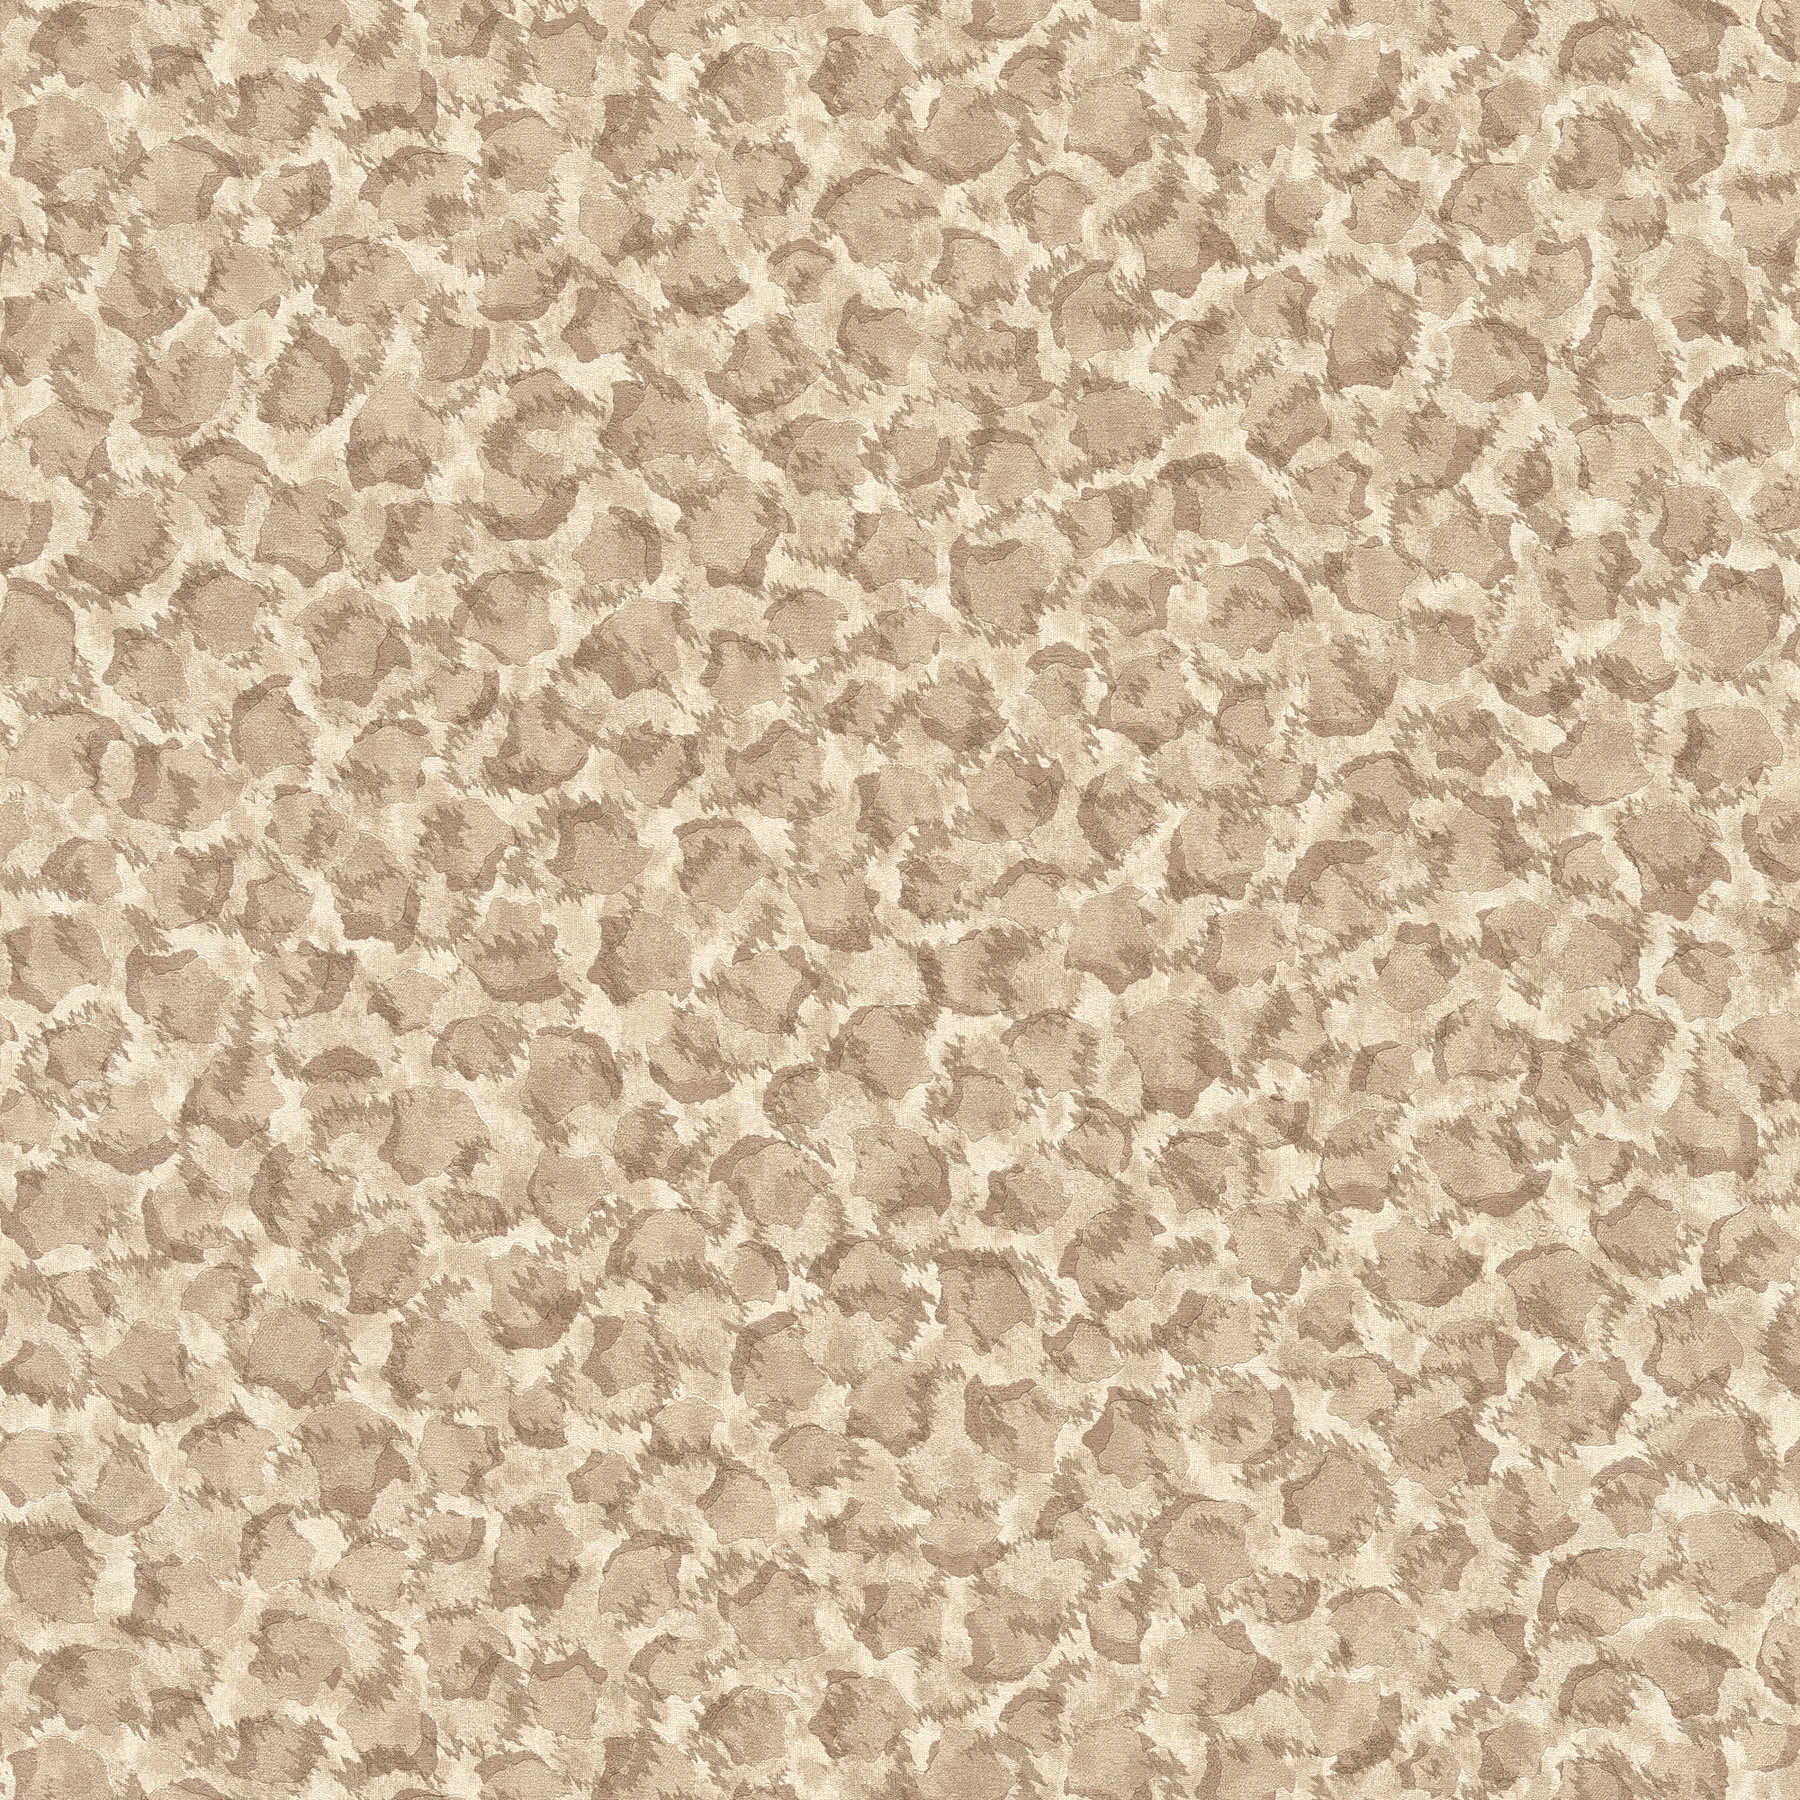 Non-woven wallpaper polka dots in earth tones in Ethnor style - beige, brown
